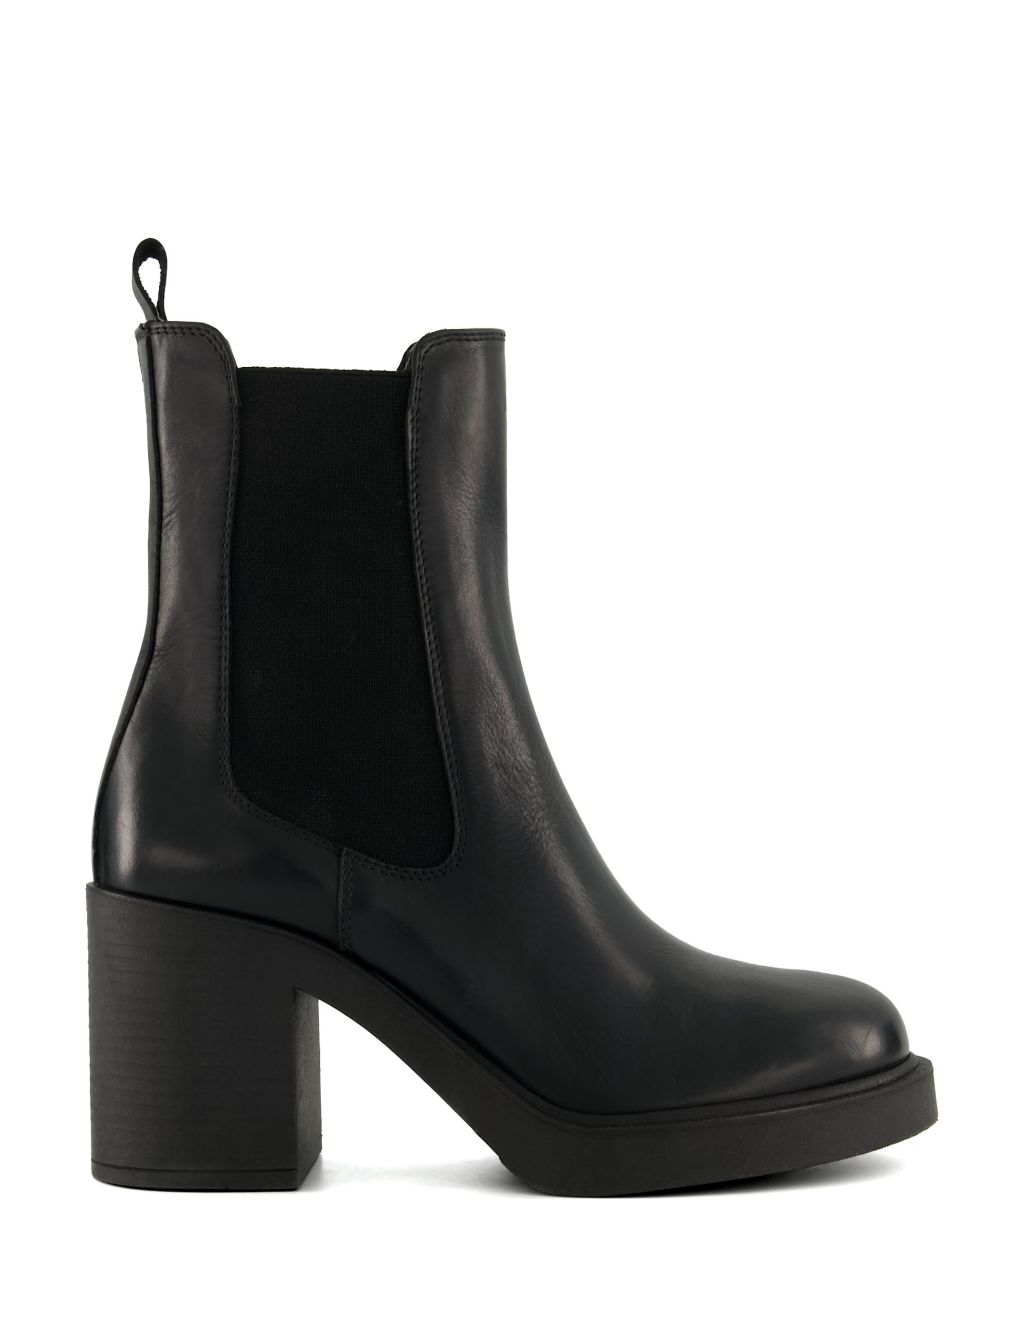 Leather Block Heel Round Toe Ankle Boots